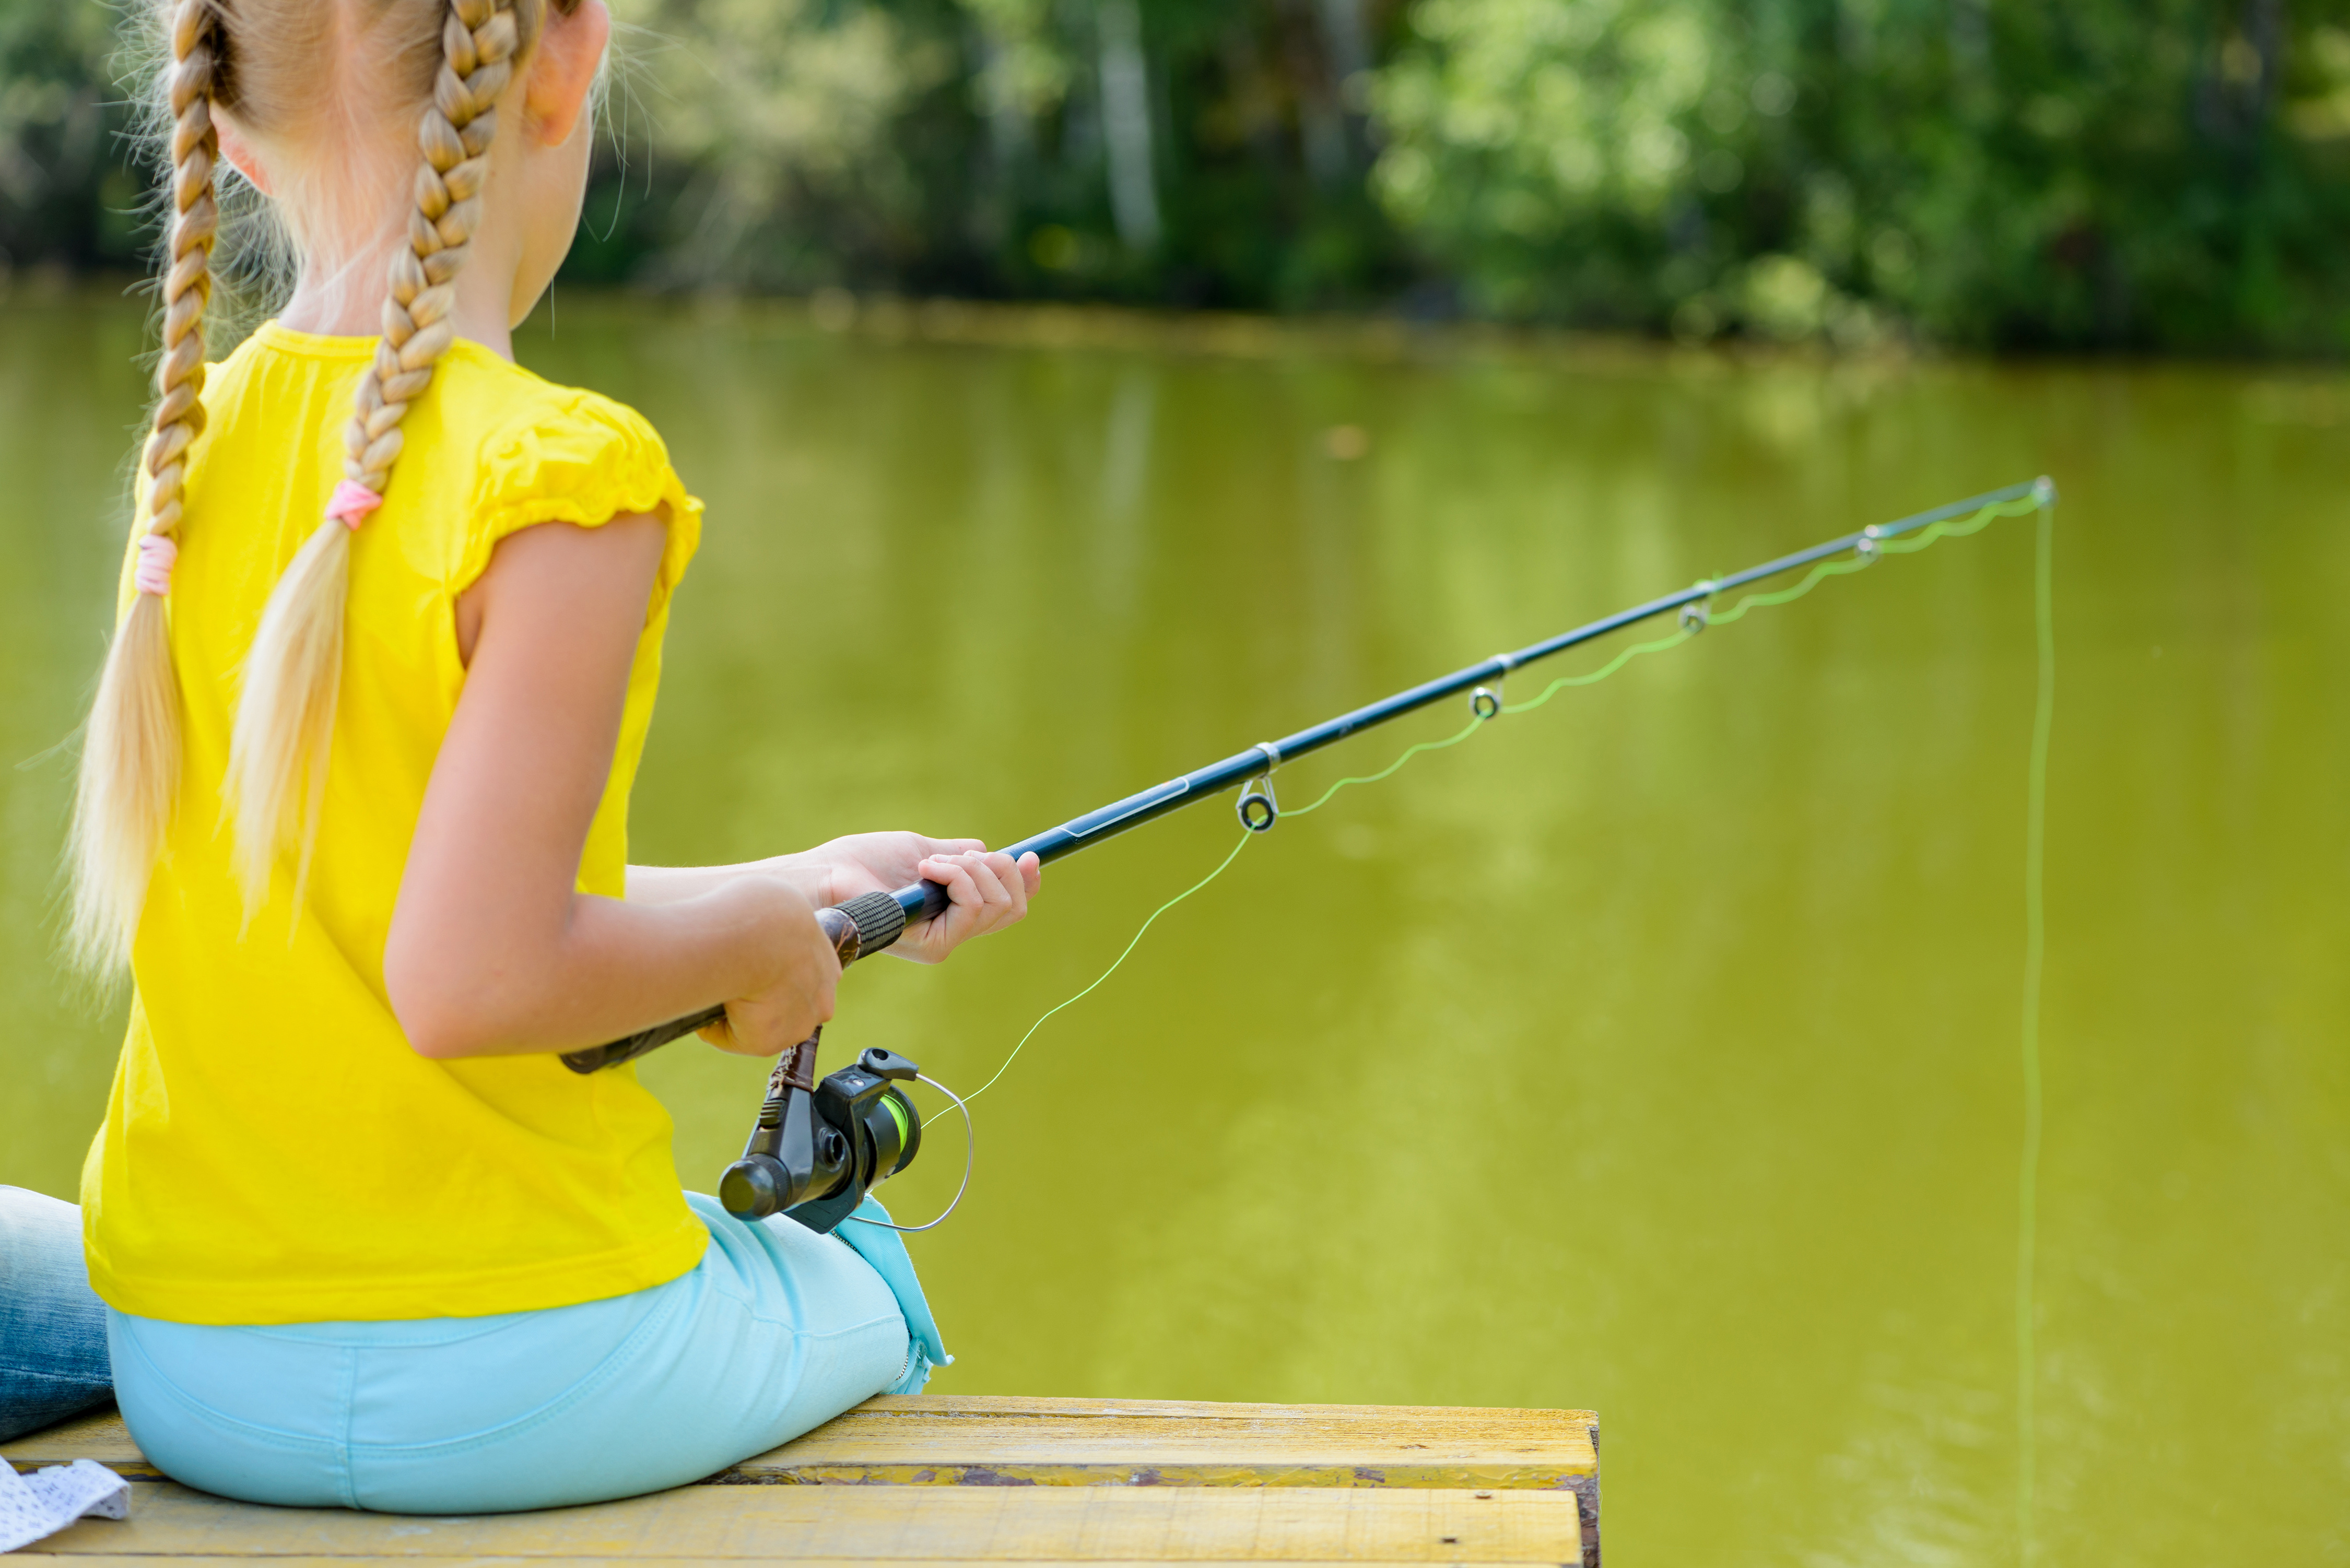 A young, blonde child with two pigtails sits on a dock made of wood while holding a fishing pole. 